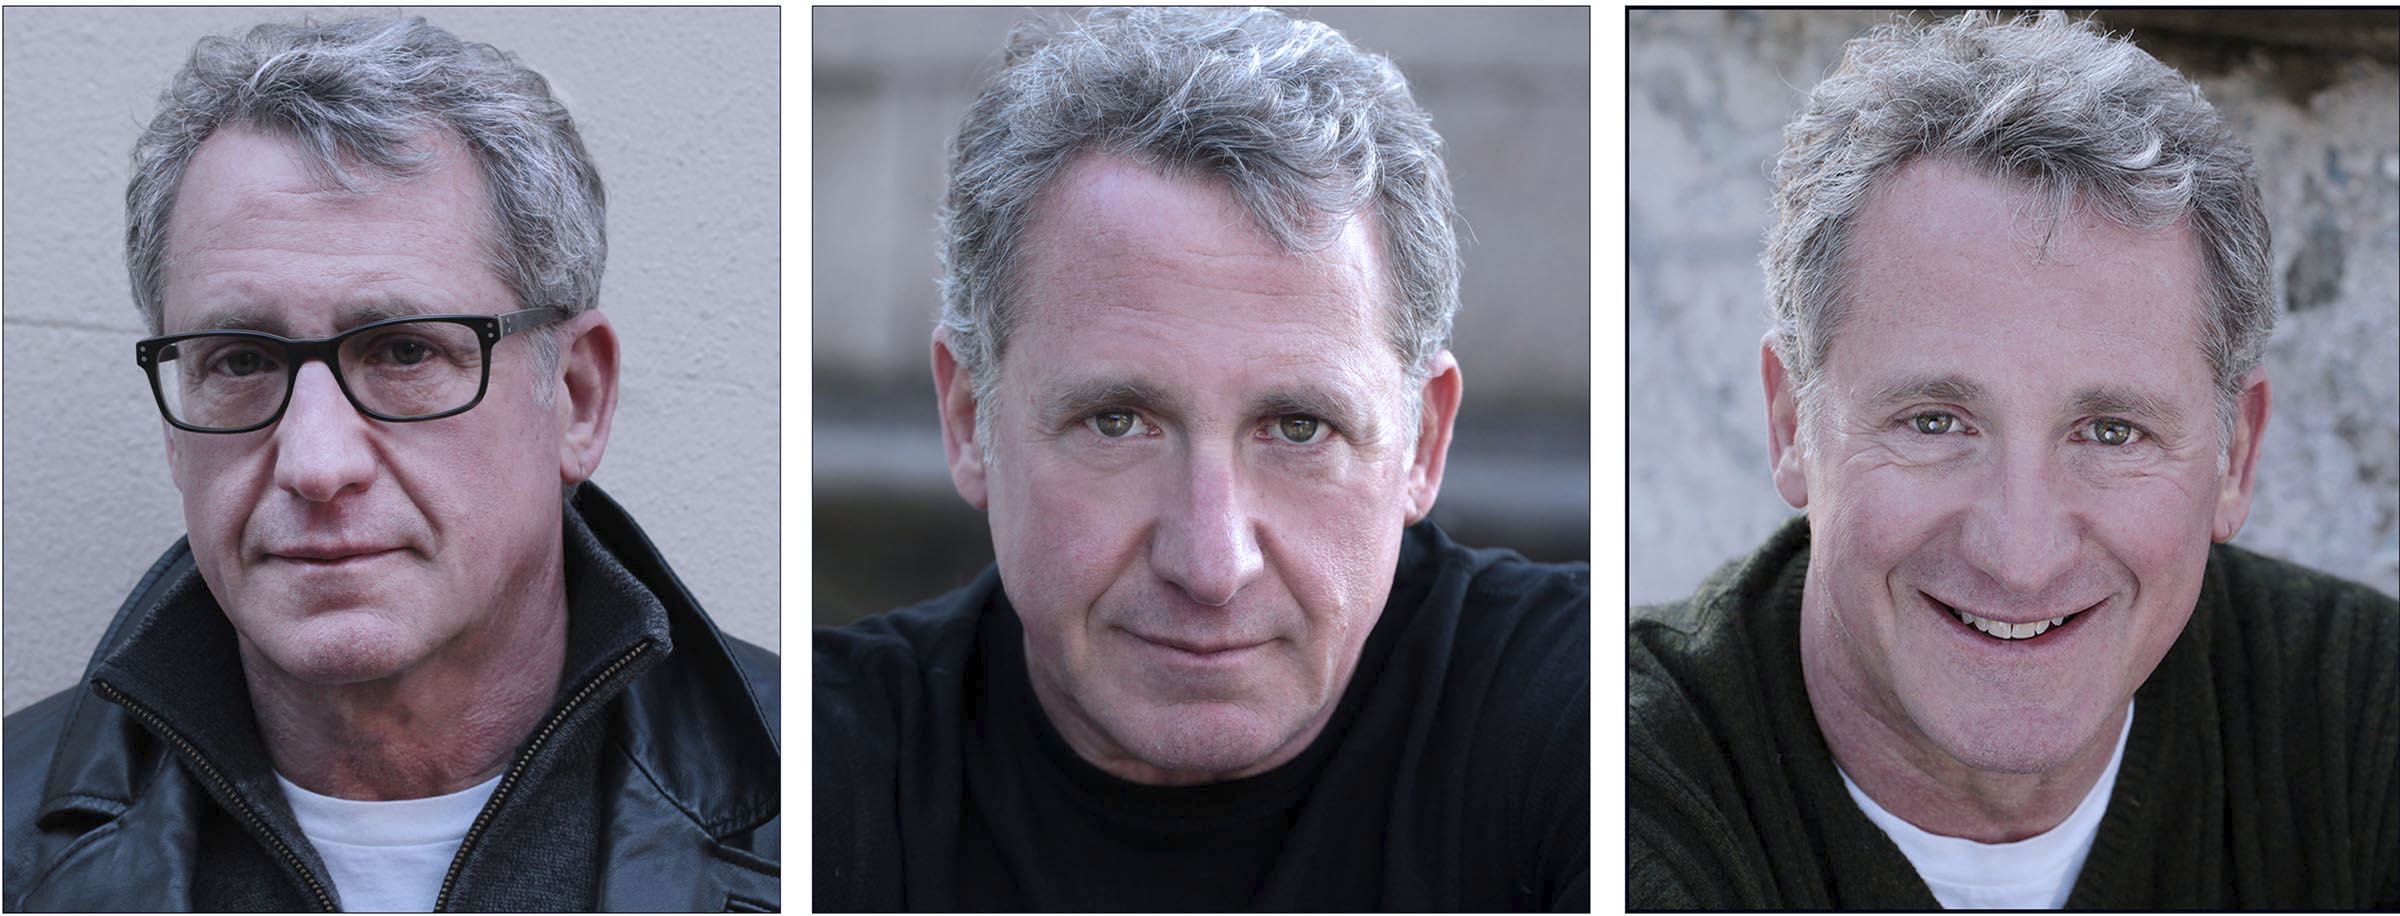 Examples of the best headshot Photographer in NYC